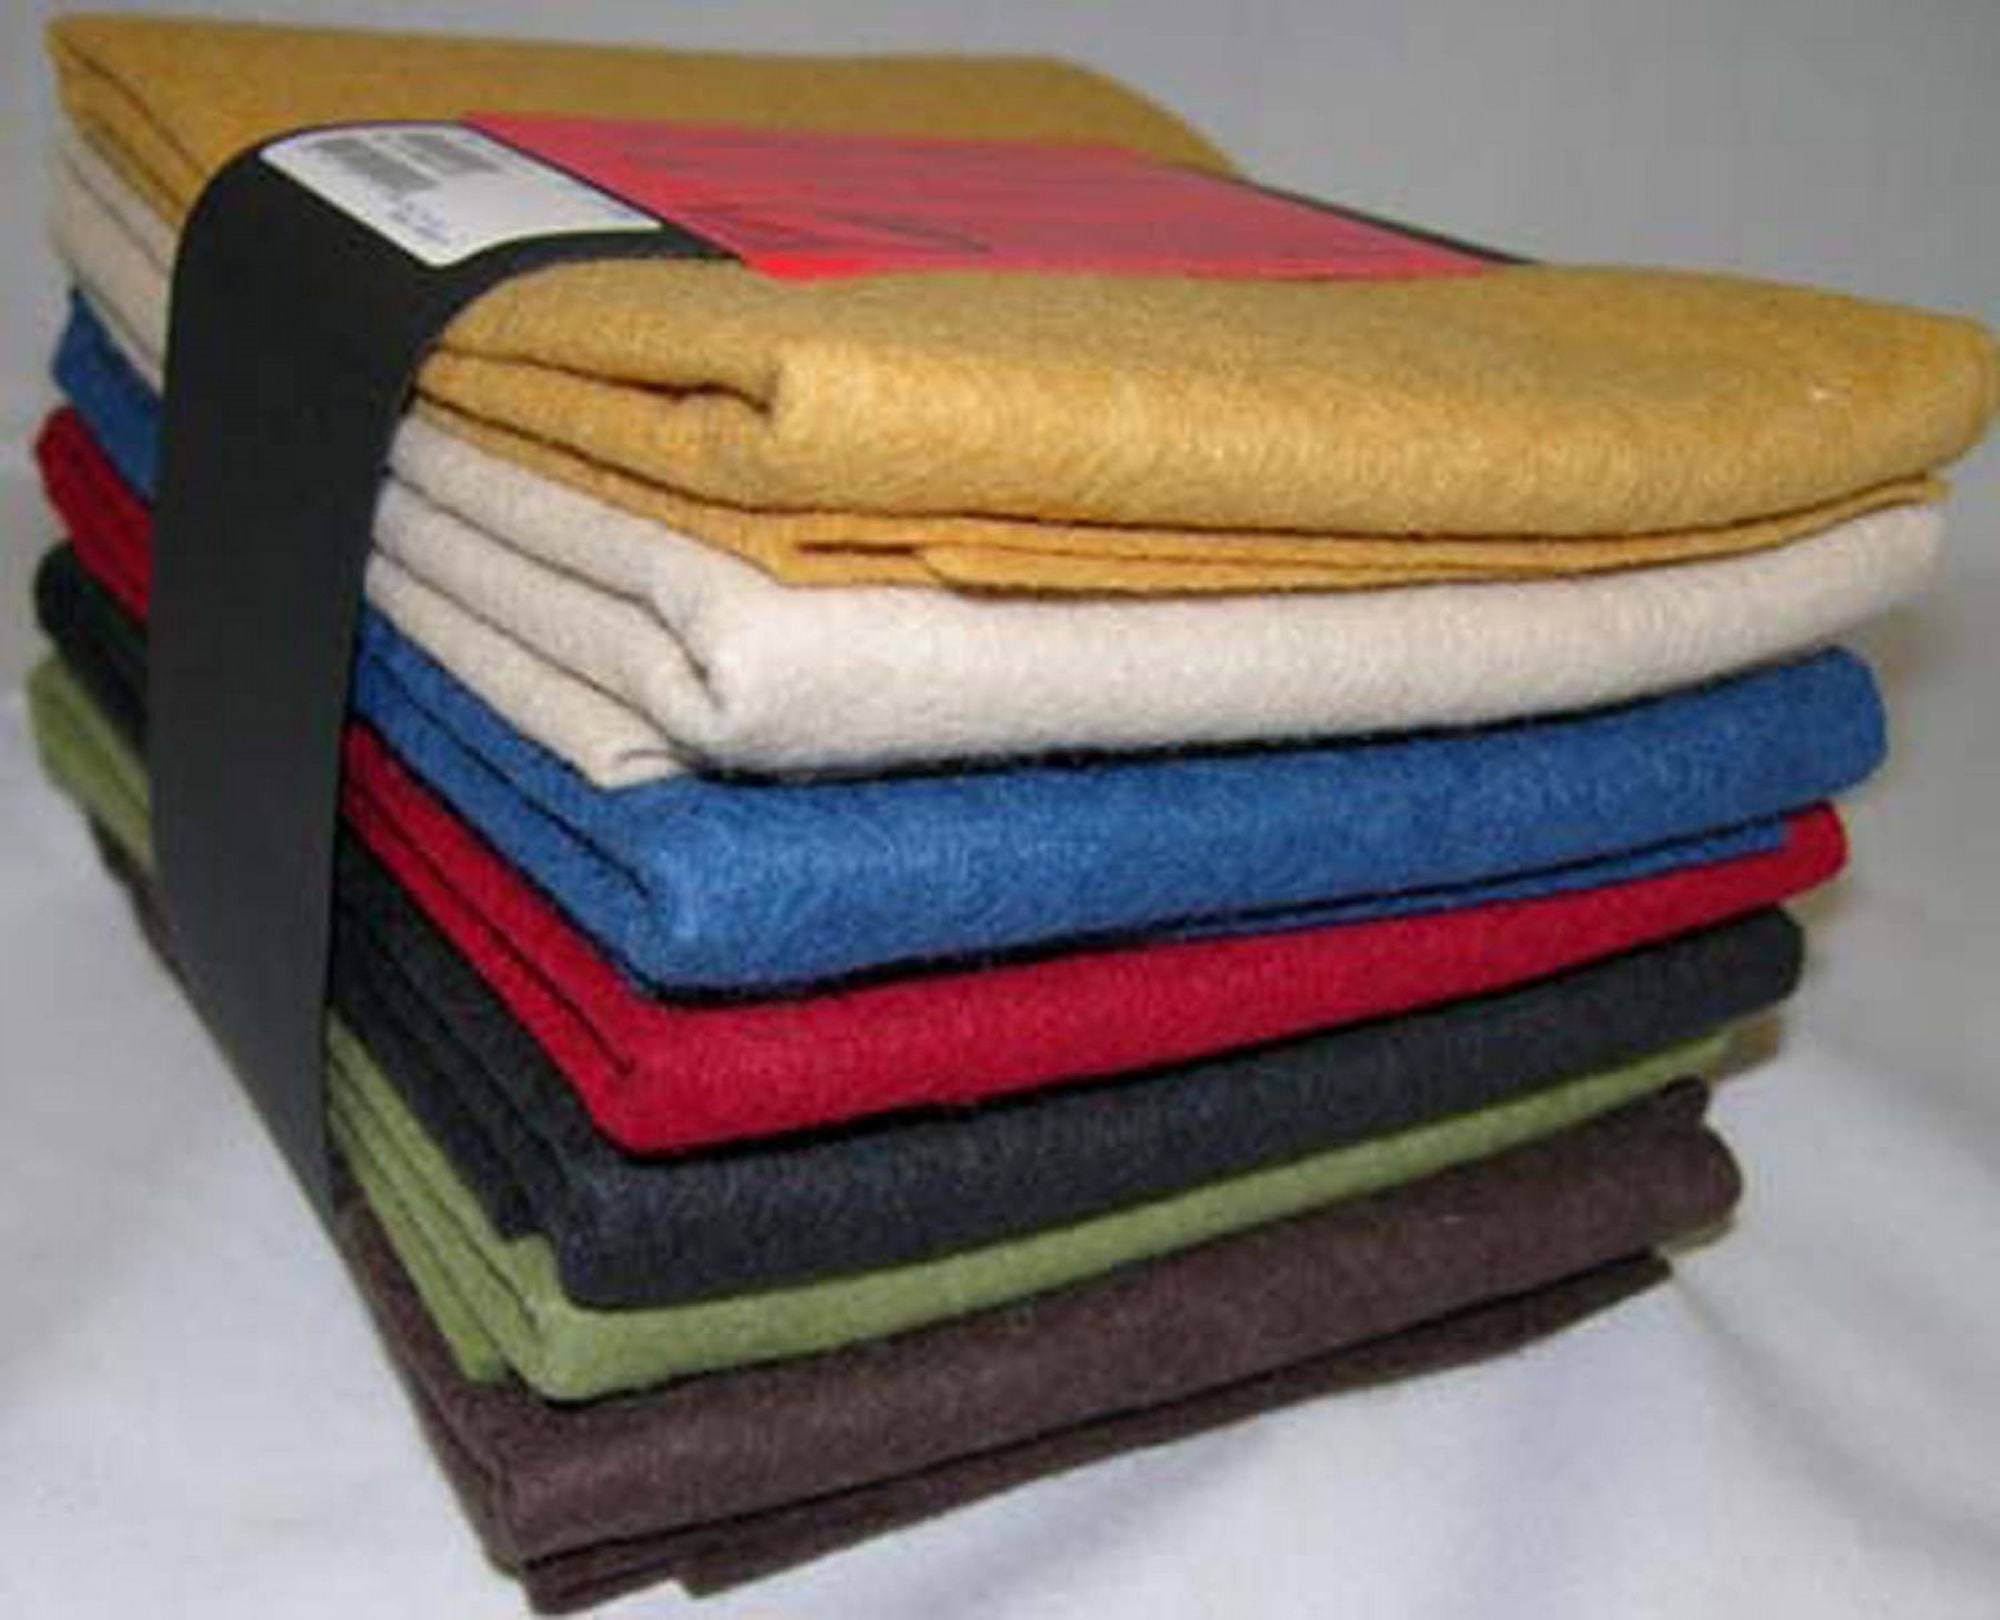  100% Wool Craft Felt - 14 Sheet Package - from National  NonWovens Co.